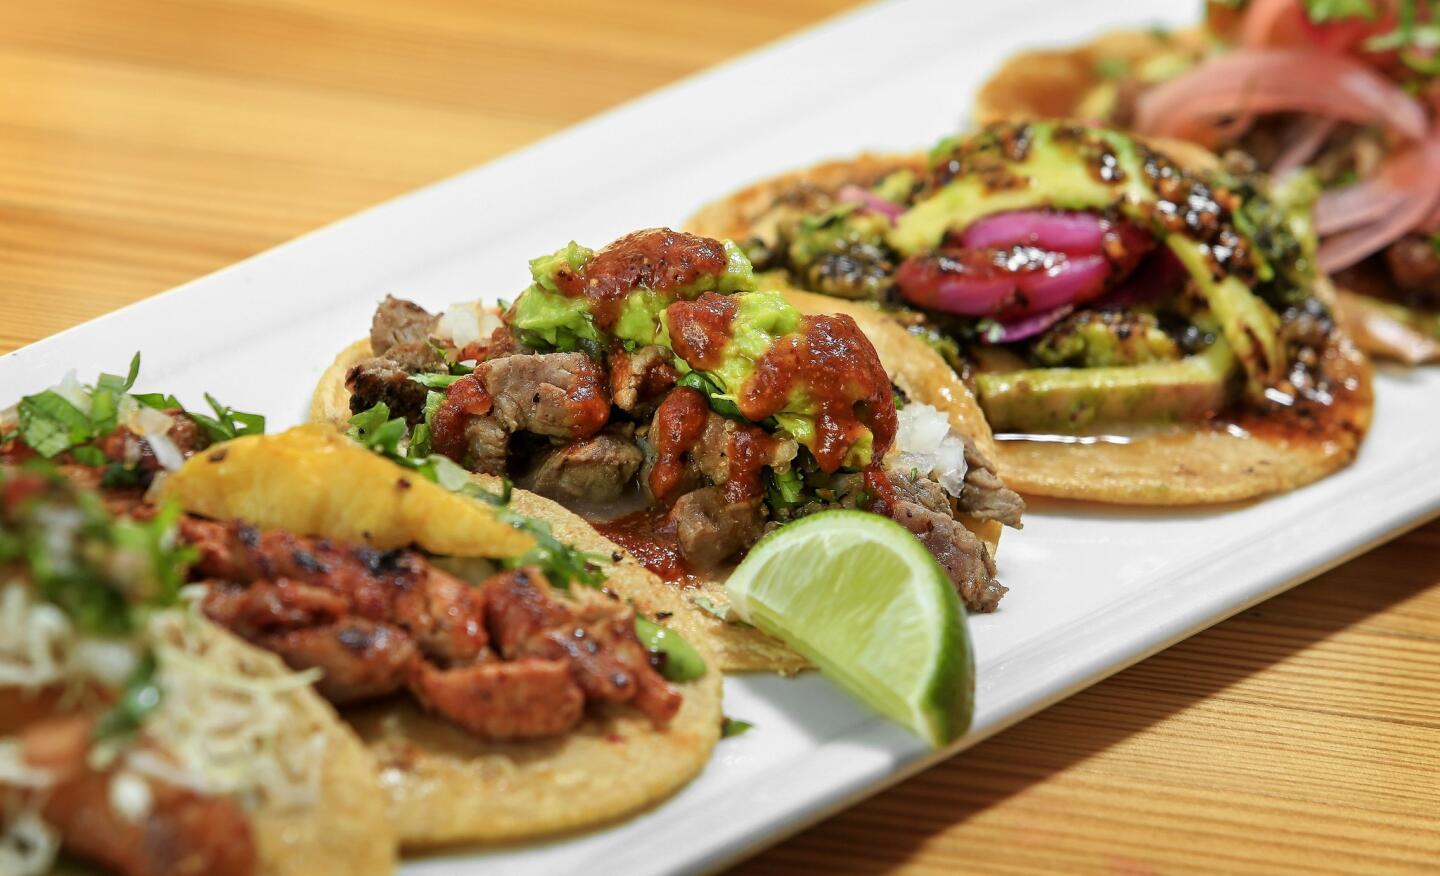 Tacos are generally $4 each or even less if you order a plate of three or more.